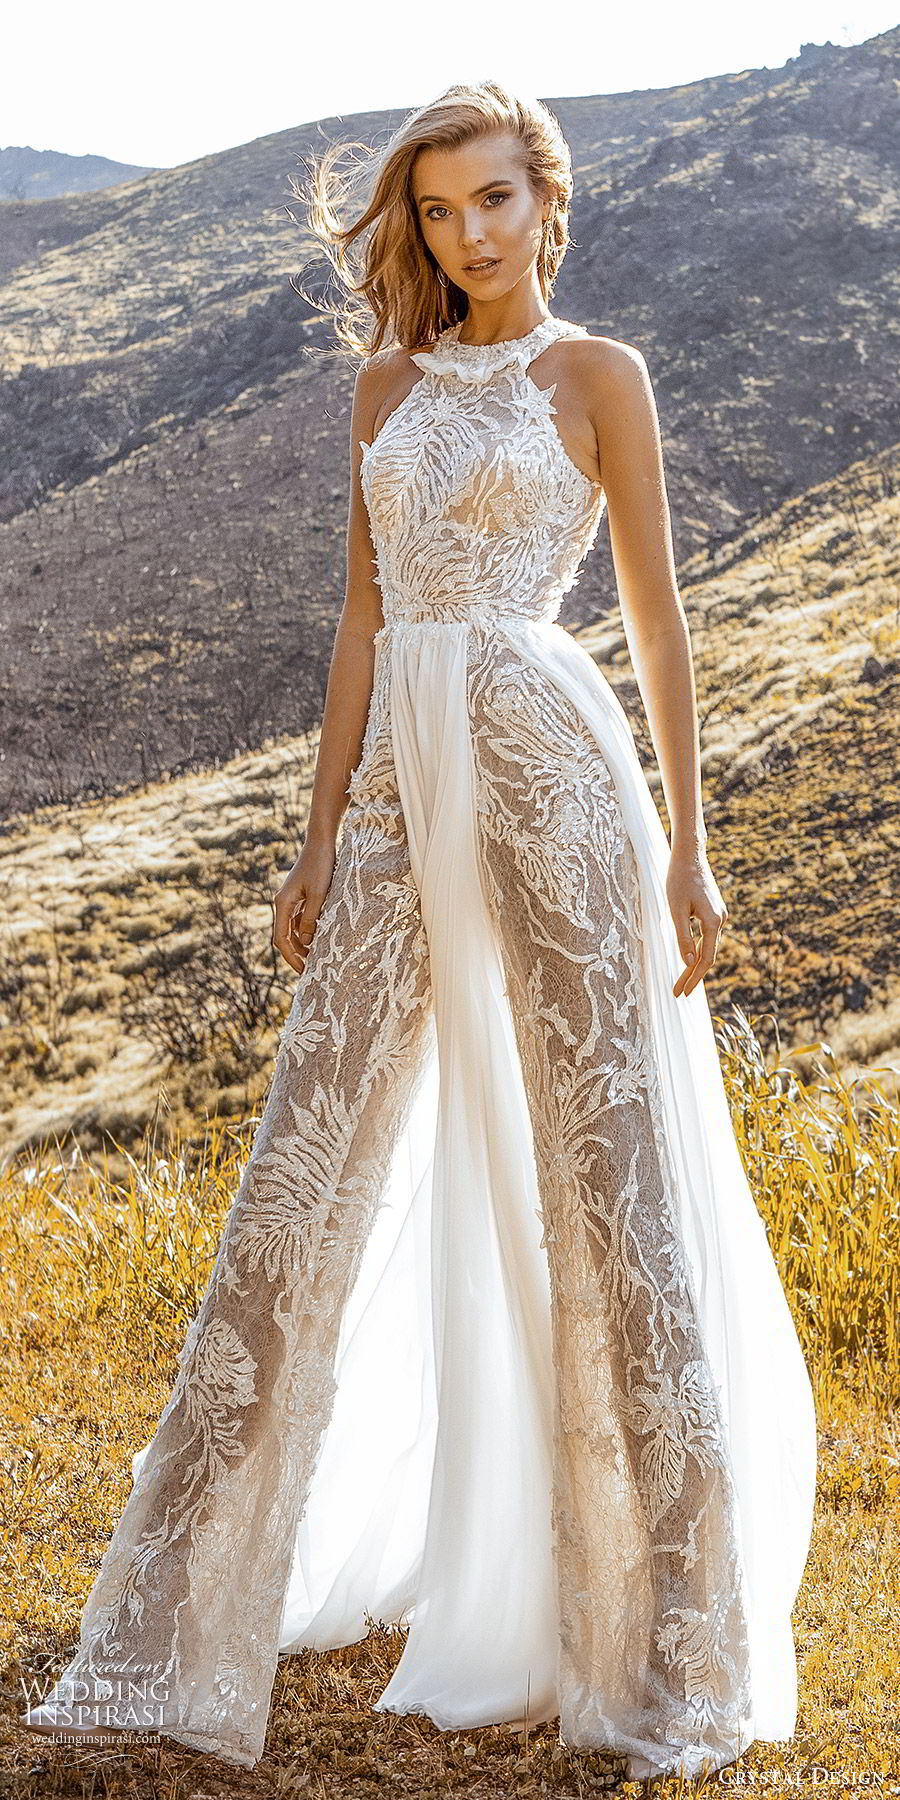 Crystal Design Couture Wedding Dresses 2020 - Belle The Magazine